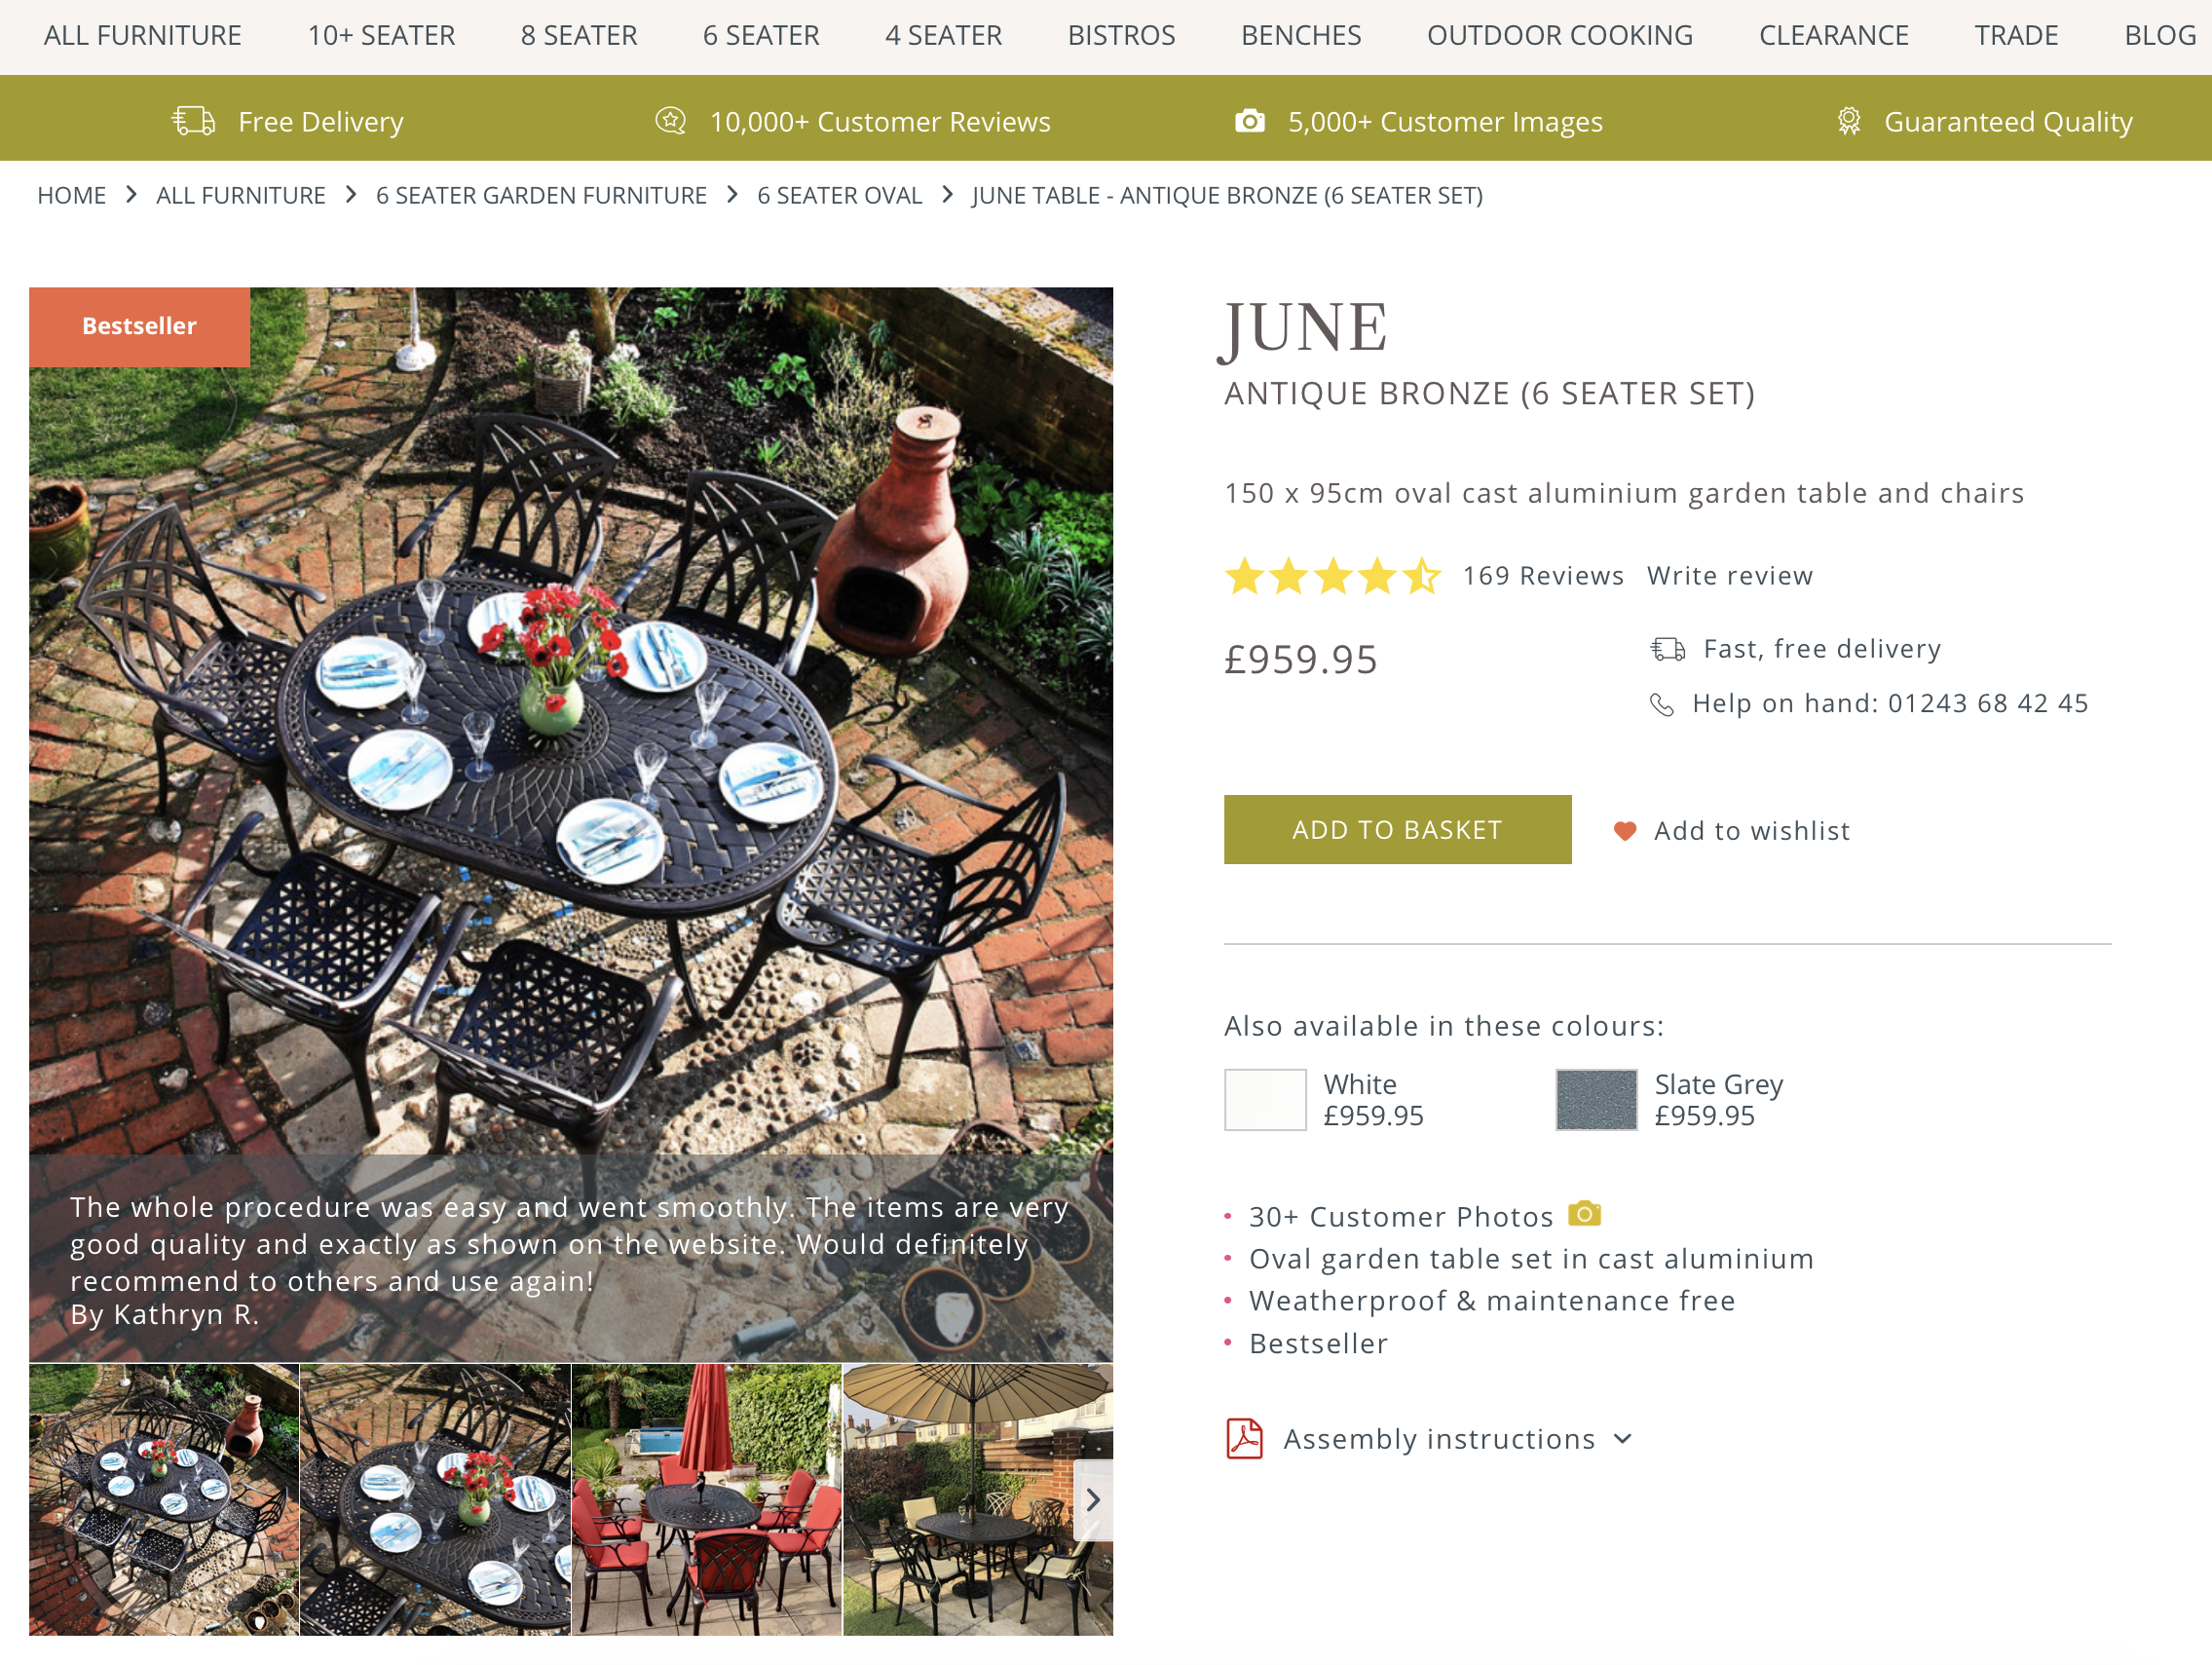 June Garden Furniture Set Product Page